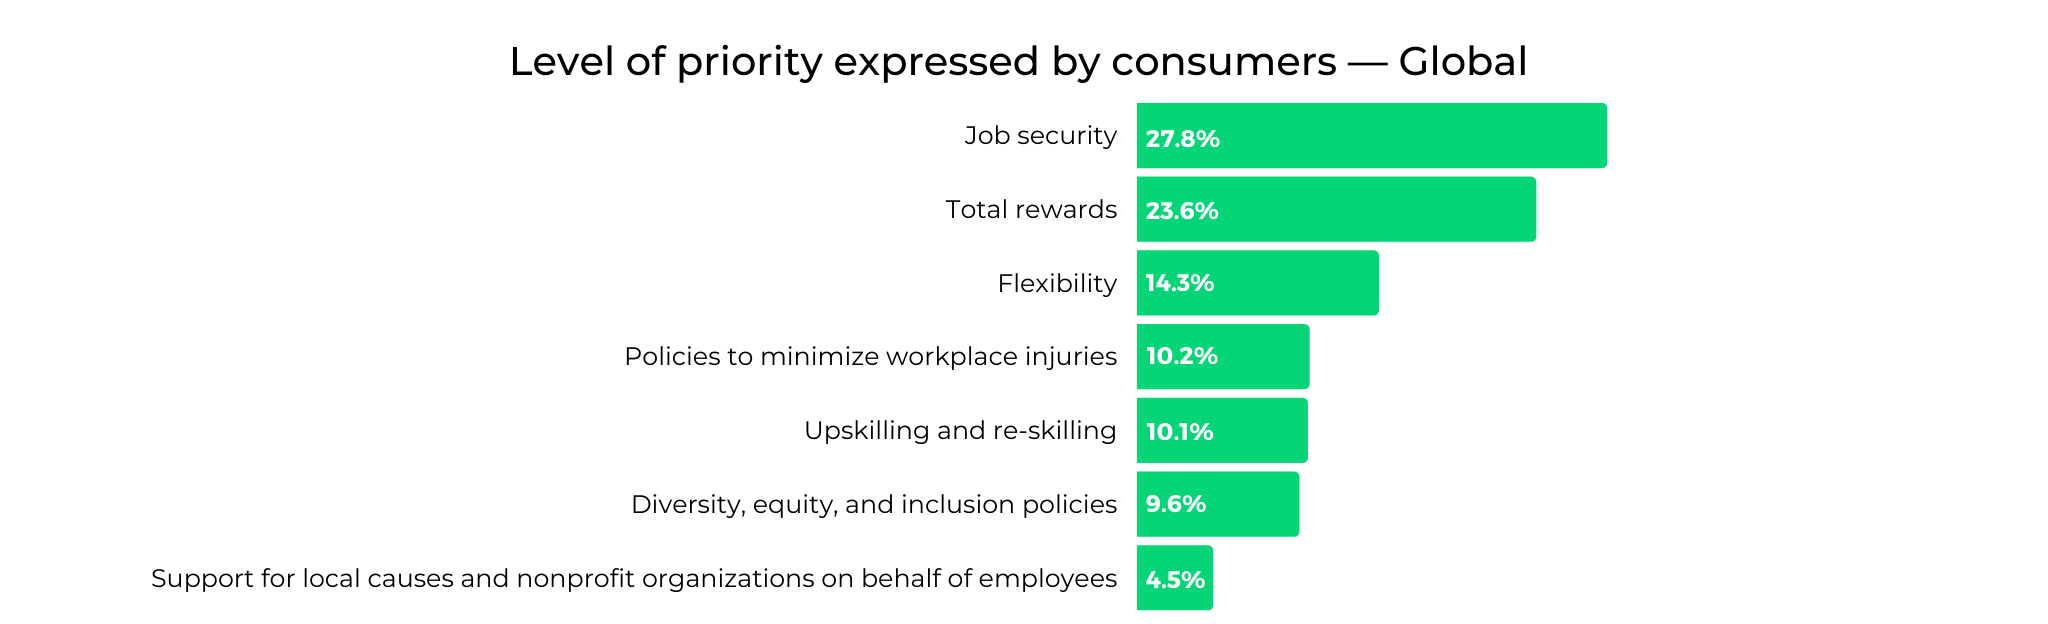 Level of priority expressed by consumers - Global